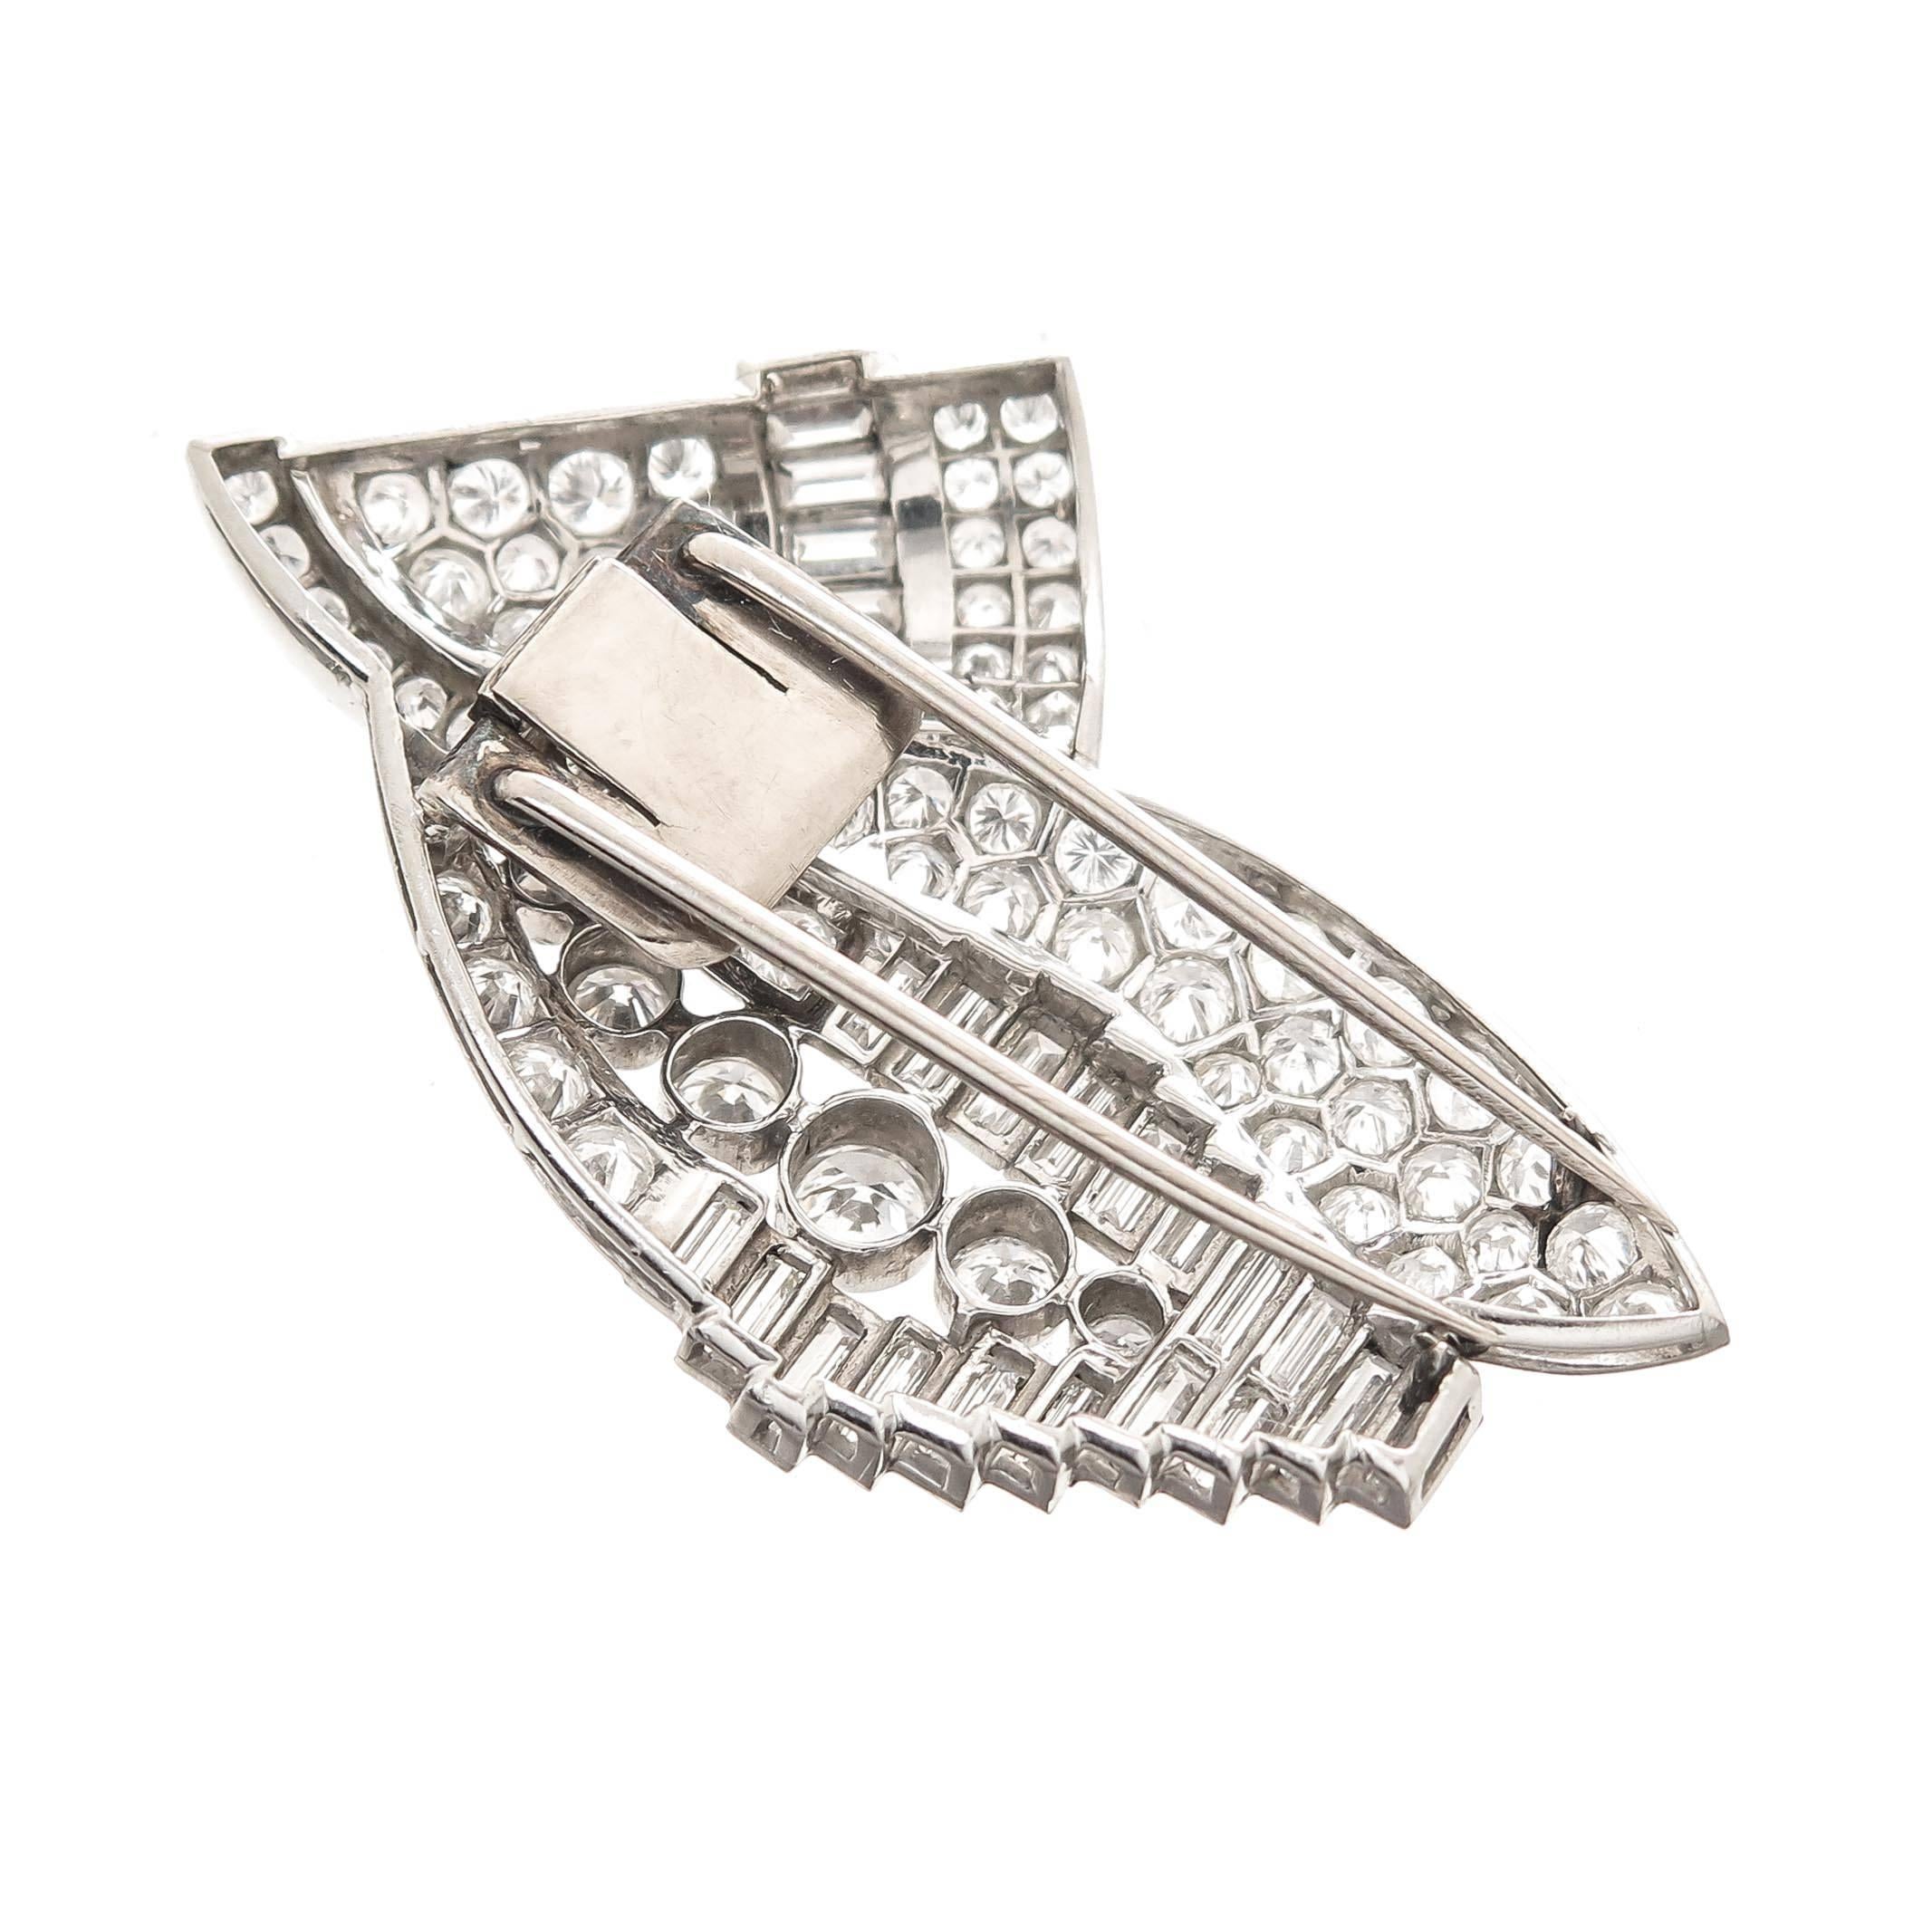 Circa 1930s Platinum Dress Clips, in a very Art Deco form, measuring 2 1/8 inches in length and 1 1/8 inch wide. The clips are set with Round Brilliant cut and Baguette Diamonds totaling 15 Carats and Grading as G in color and VS in Clarity. Both